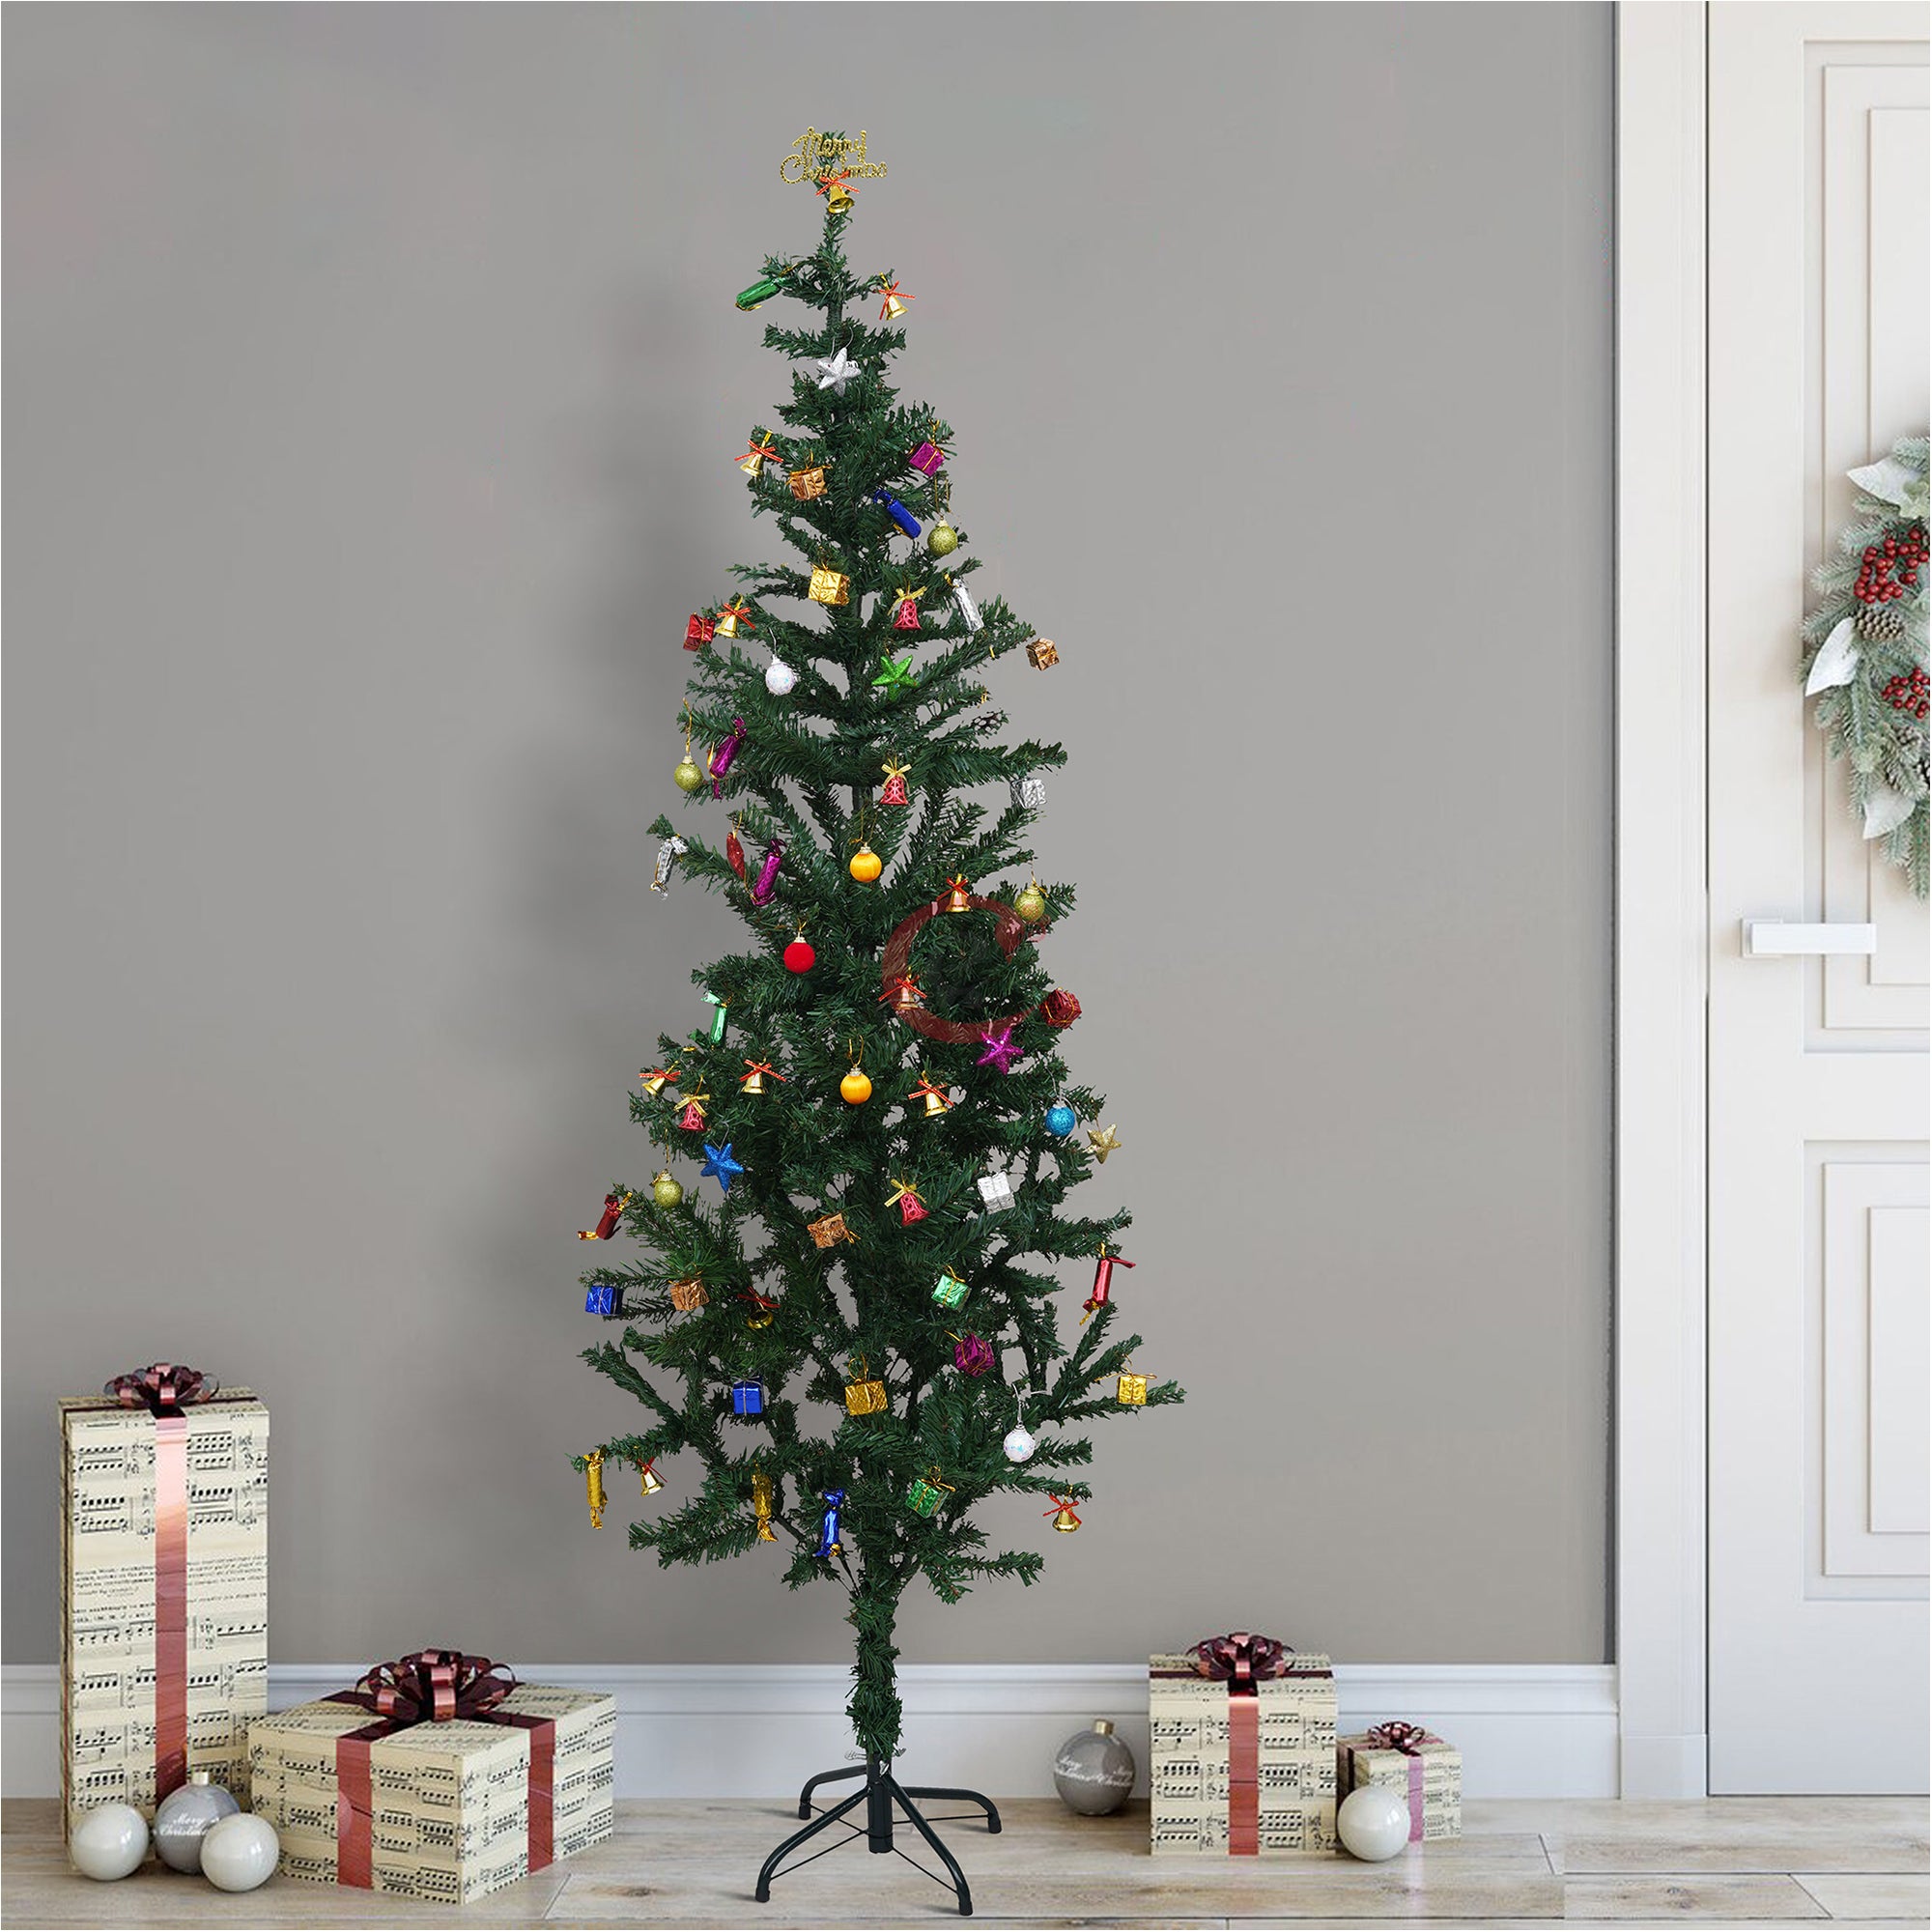 eCraftIndia 6 Feet Green Artificial Christmas Tree Xmas Pine Tree with Stand and 100 Christmas Decoration Ornaments Props - Merry Christmas Decoration Item for Home, Office, and Church 1